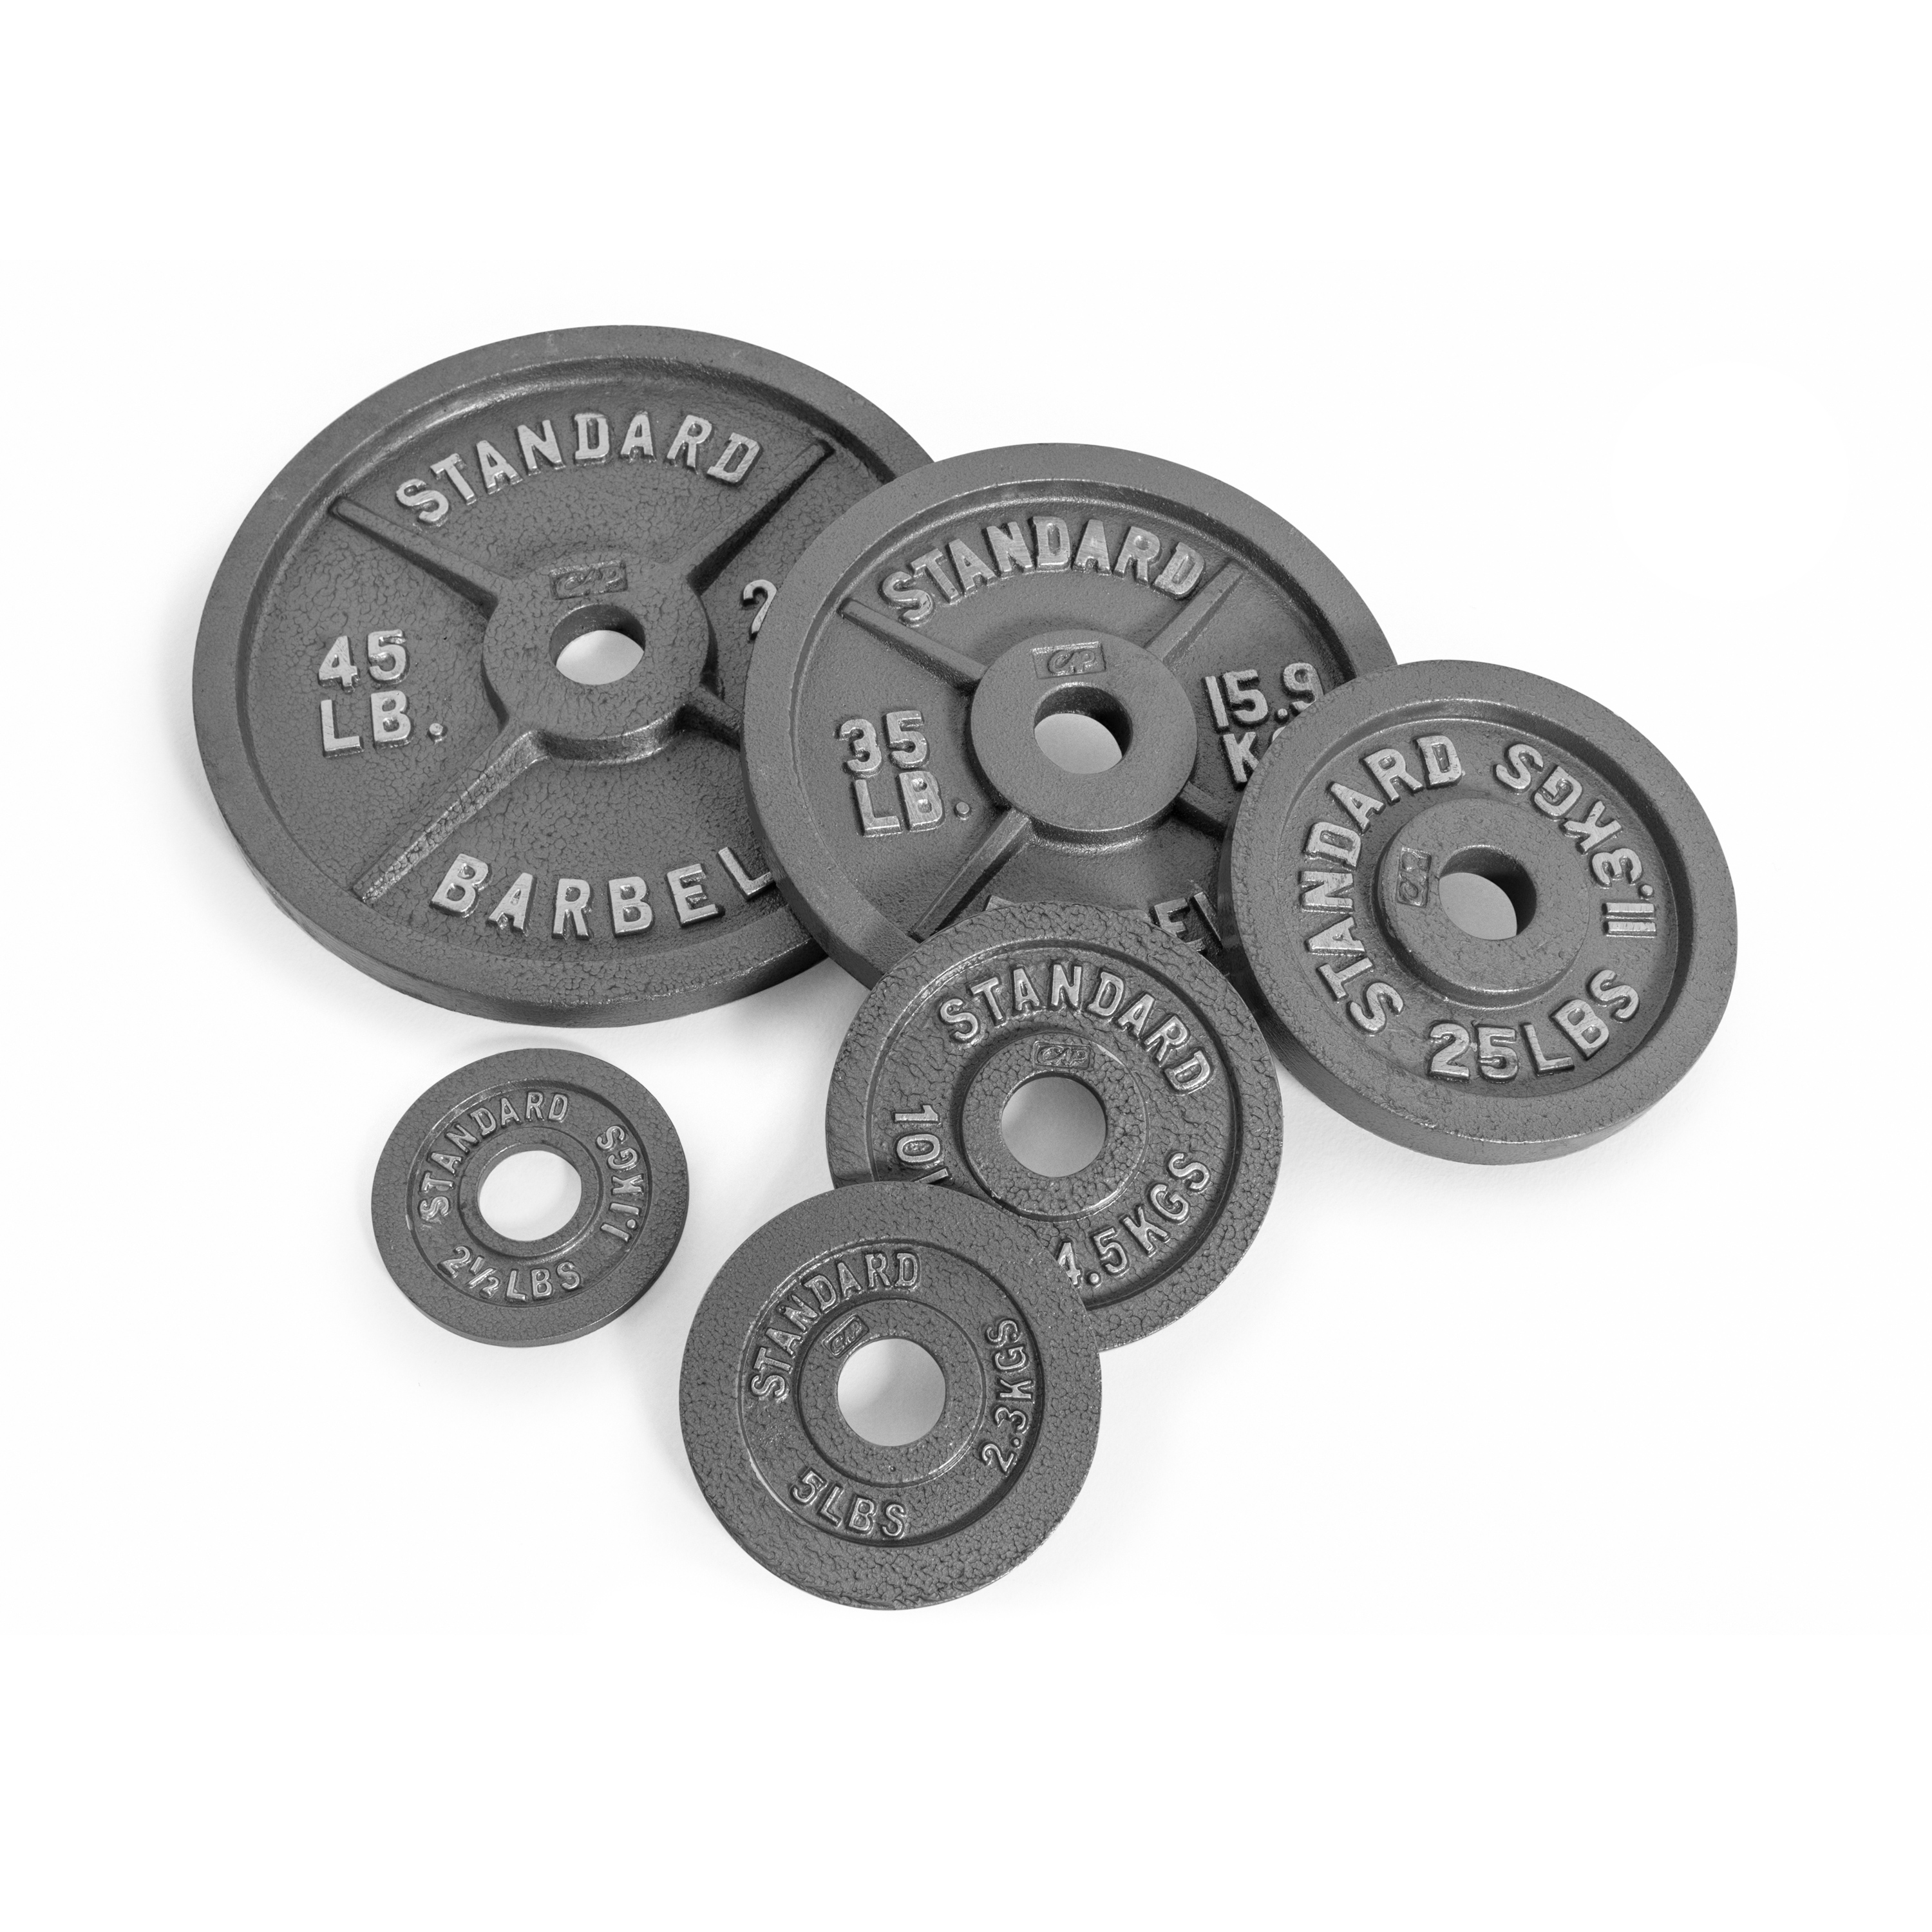 CAP Barbell Gray Olympic Cast Iron Weight Plate, 35 lb - image 2 of 2